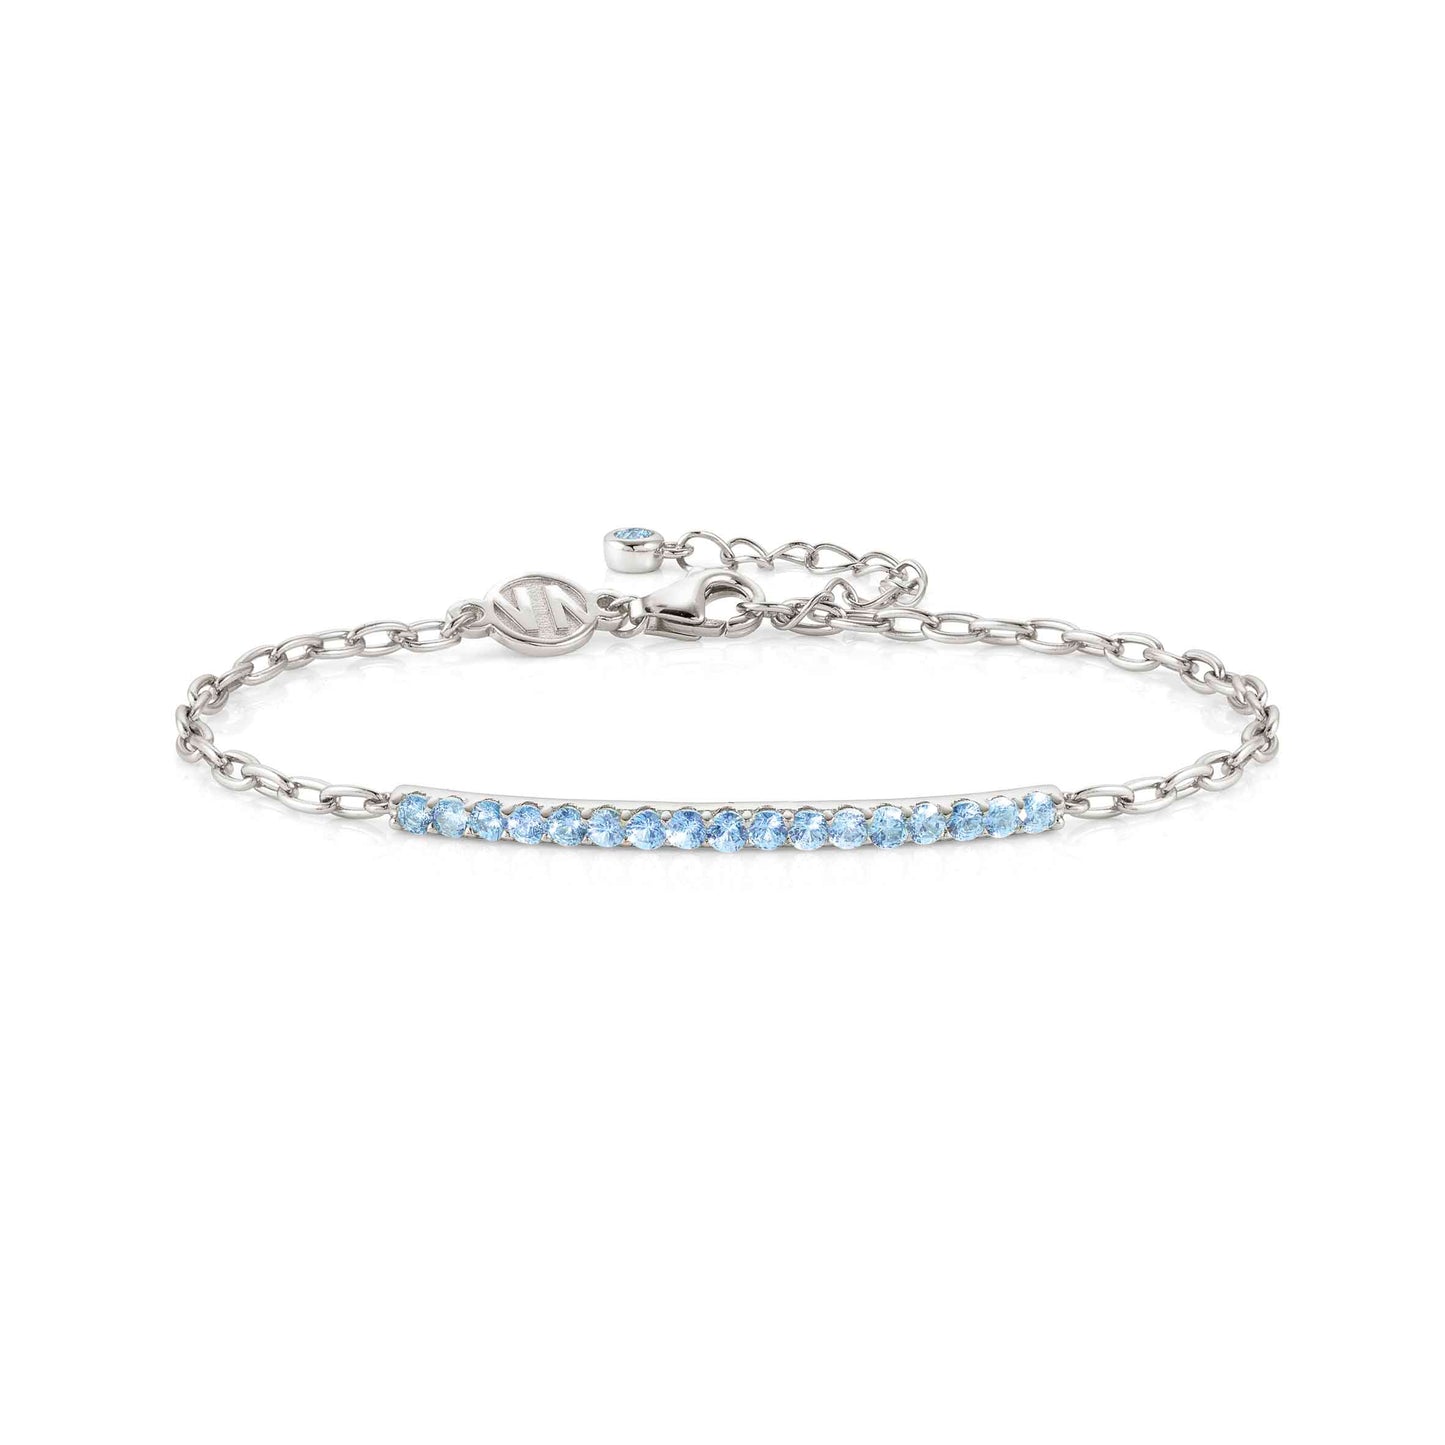 149703/019 LOVELIGHT Sterling Silver with Light Blue Cubic Zirconia Stones